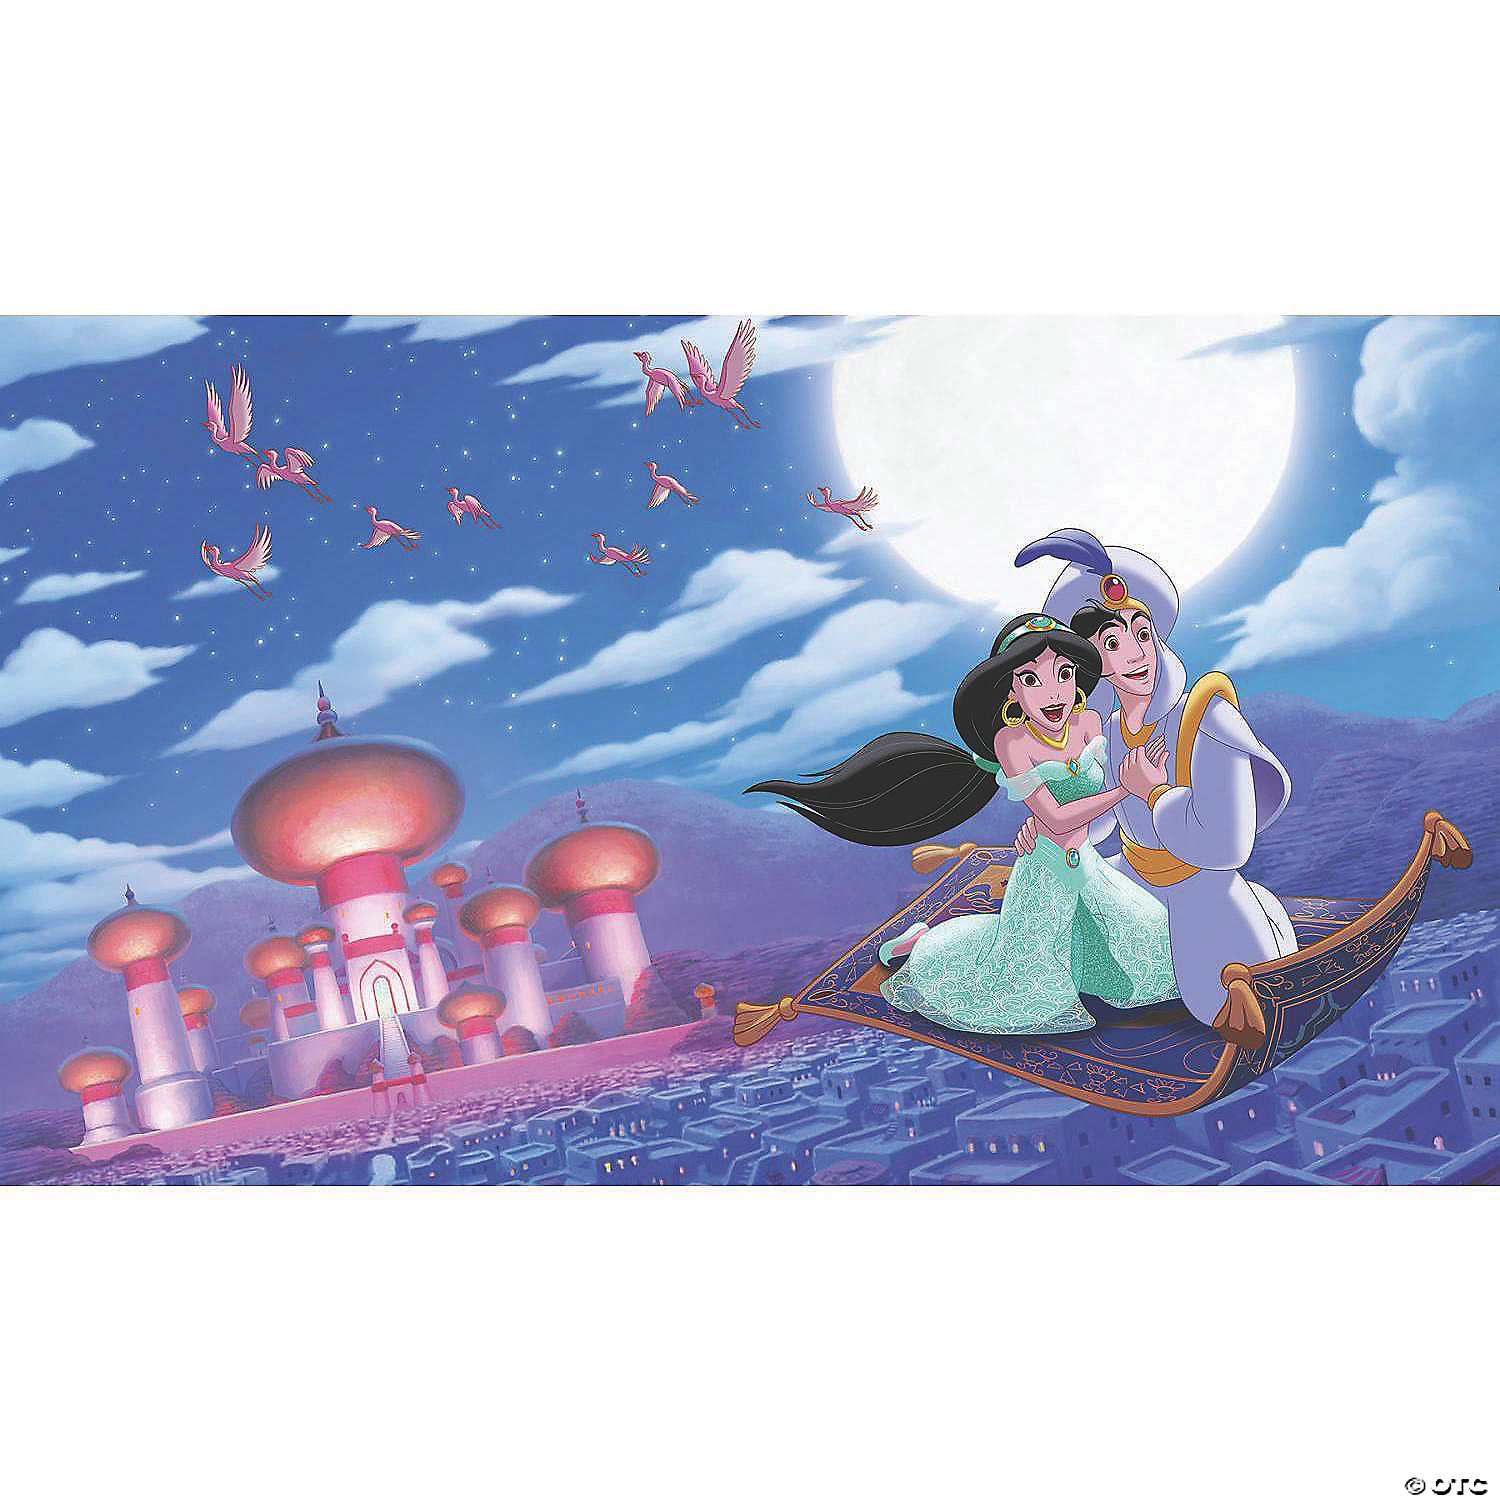 Aladdin A Whole New World Prepasted Wallpaper Mural | Oriental Trading